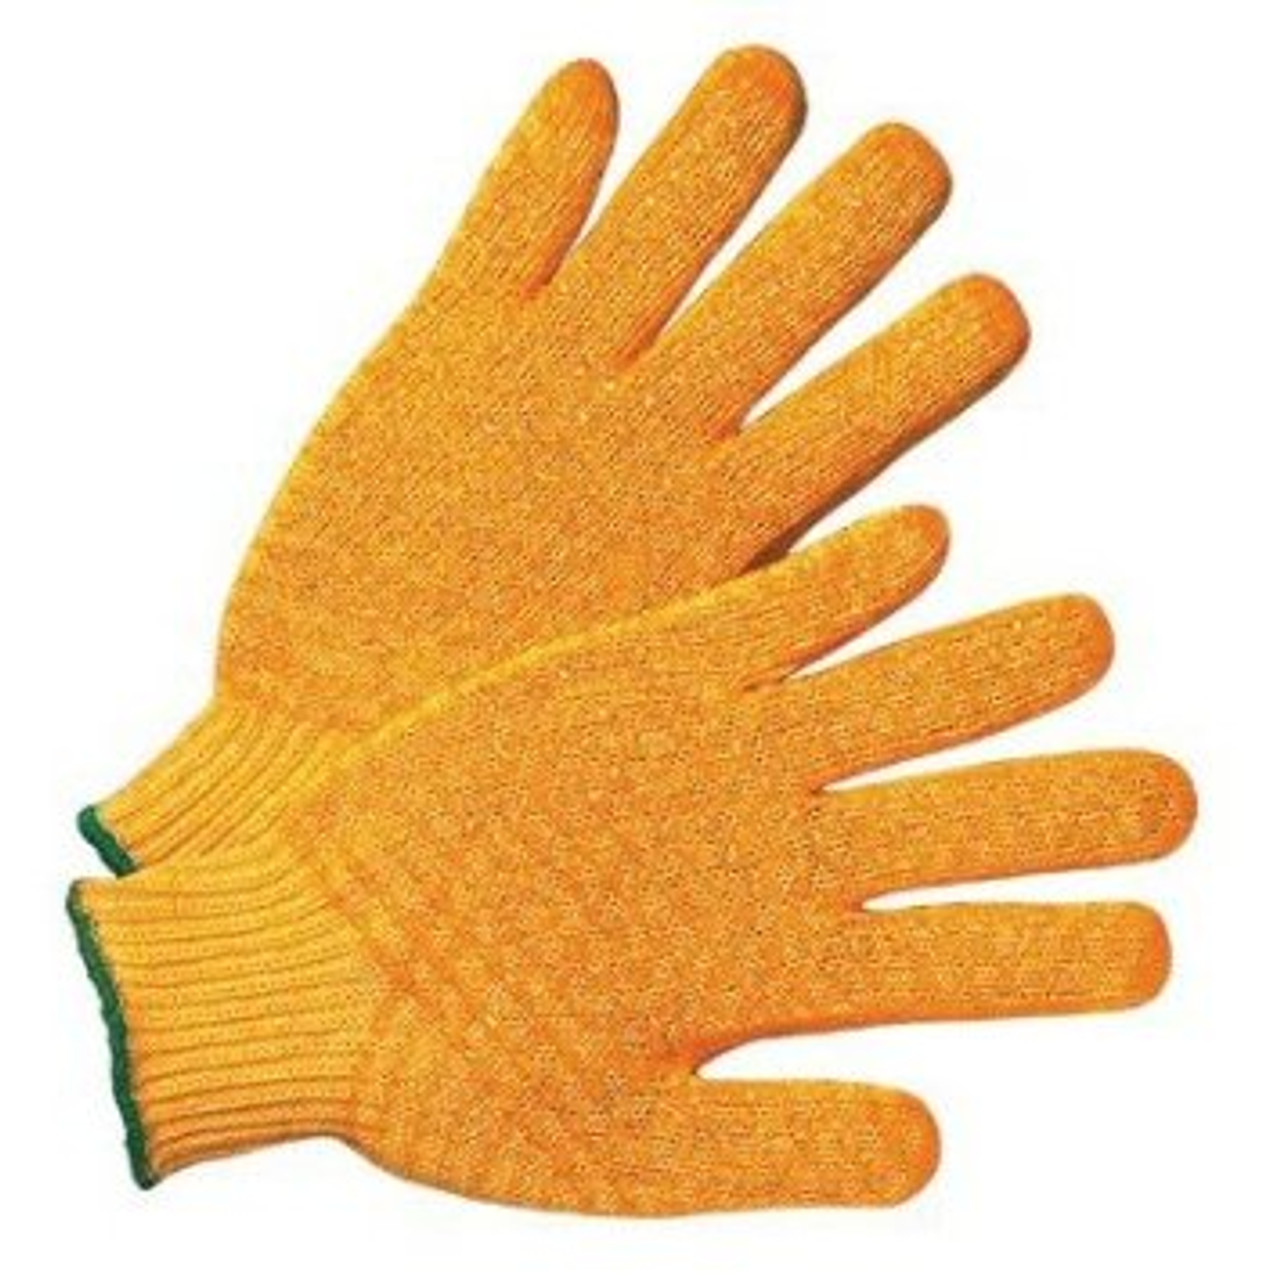 PVC HoneyComb Coated String Knit Gloves  ##370 ##